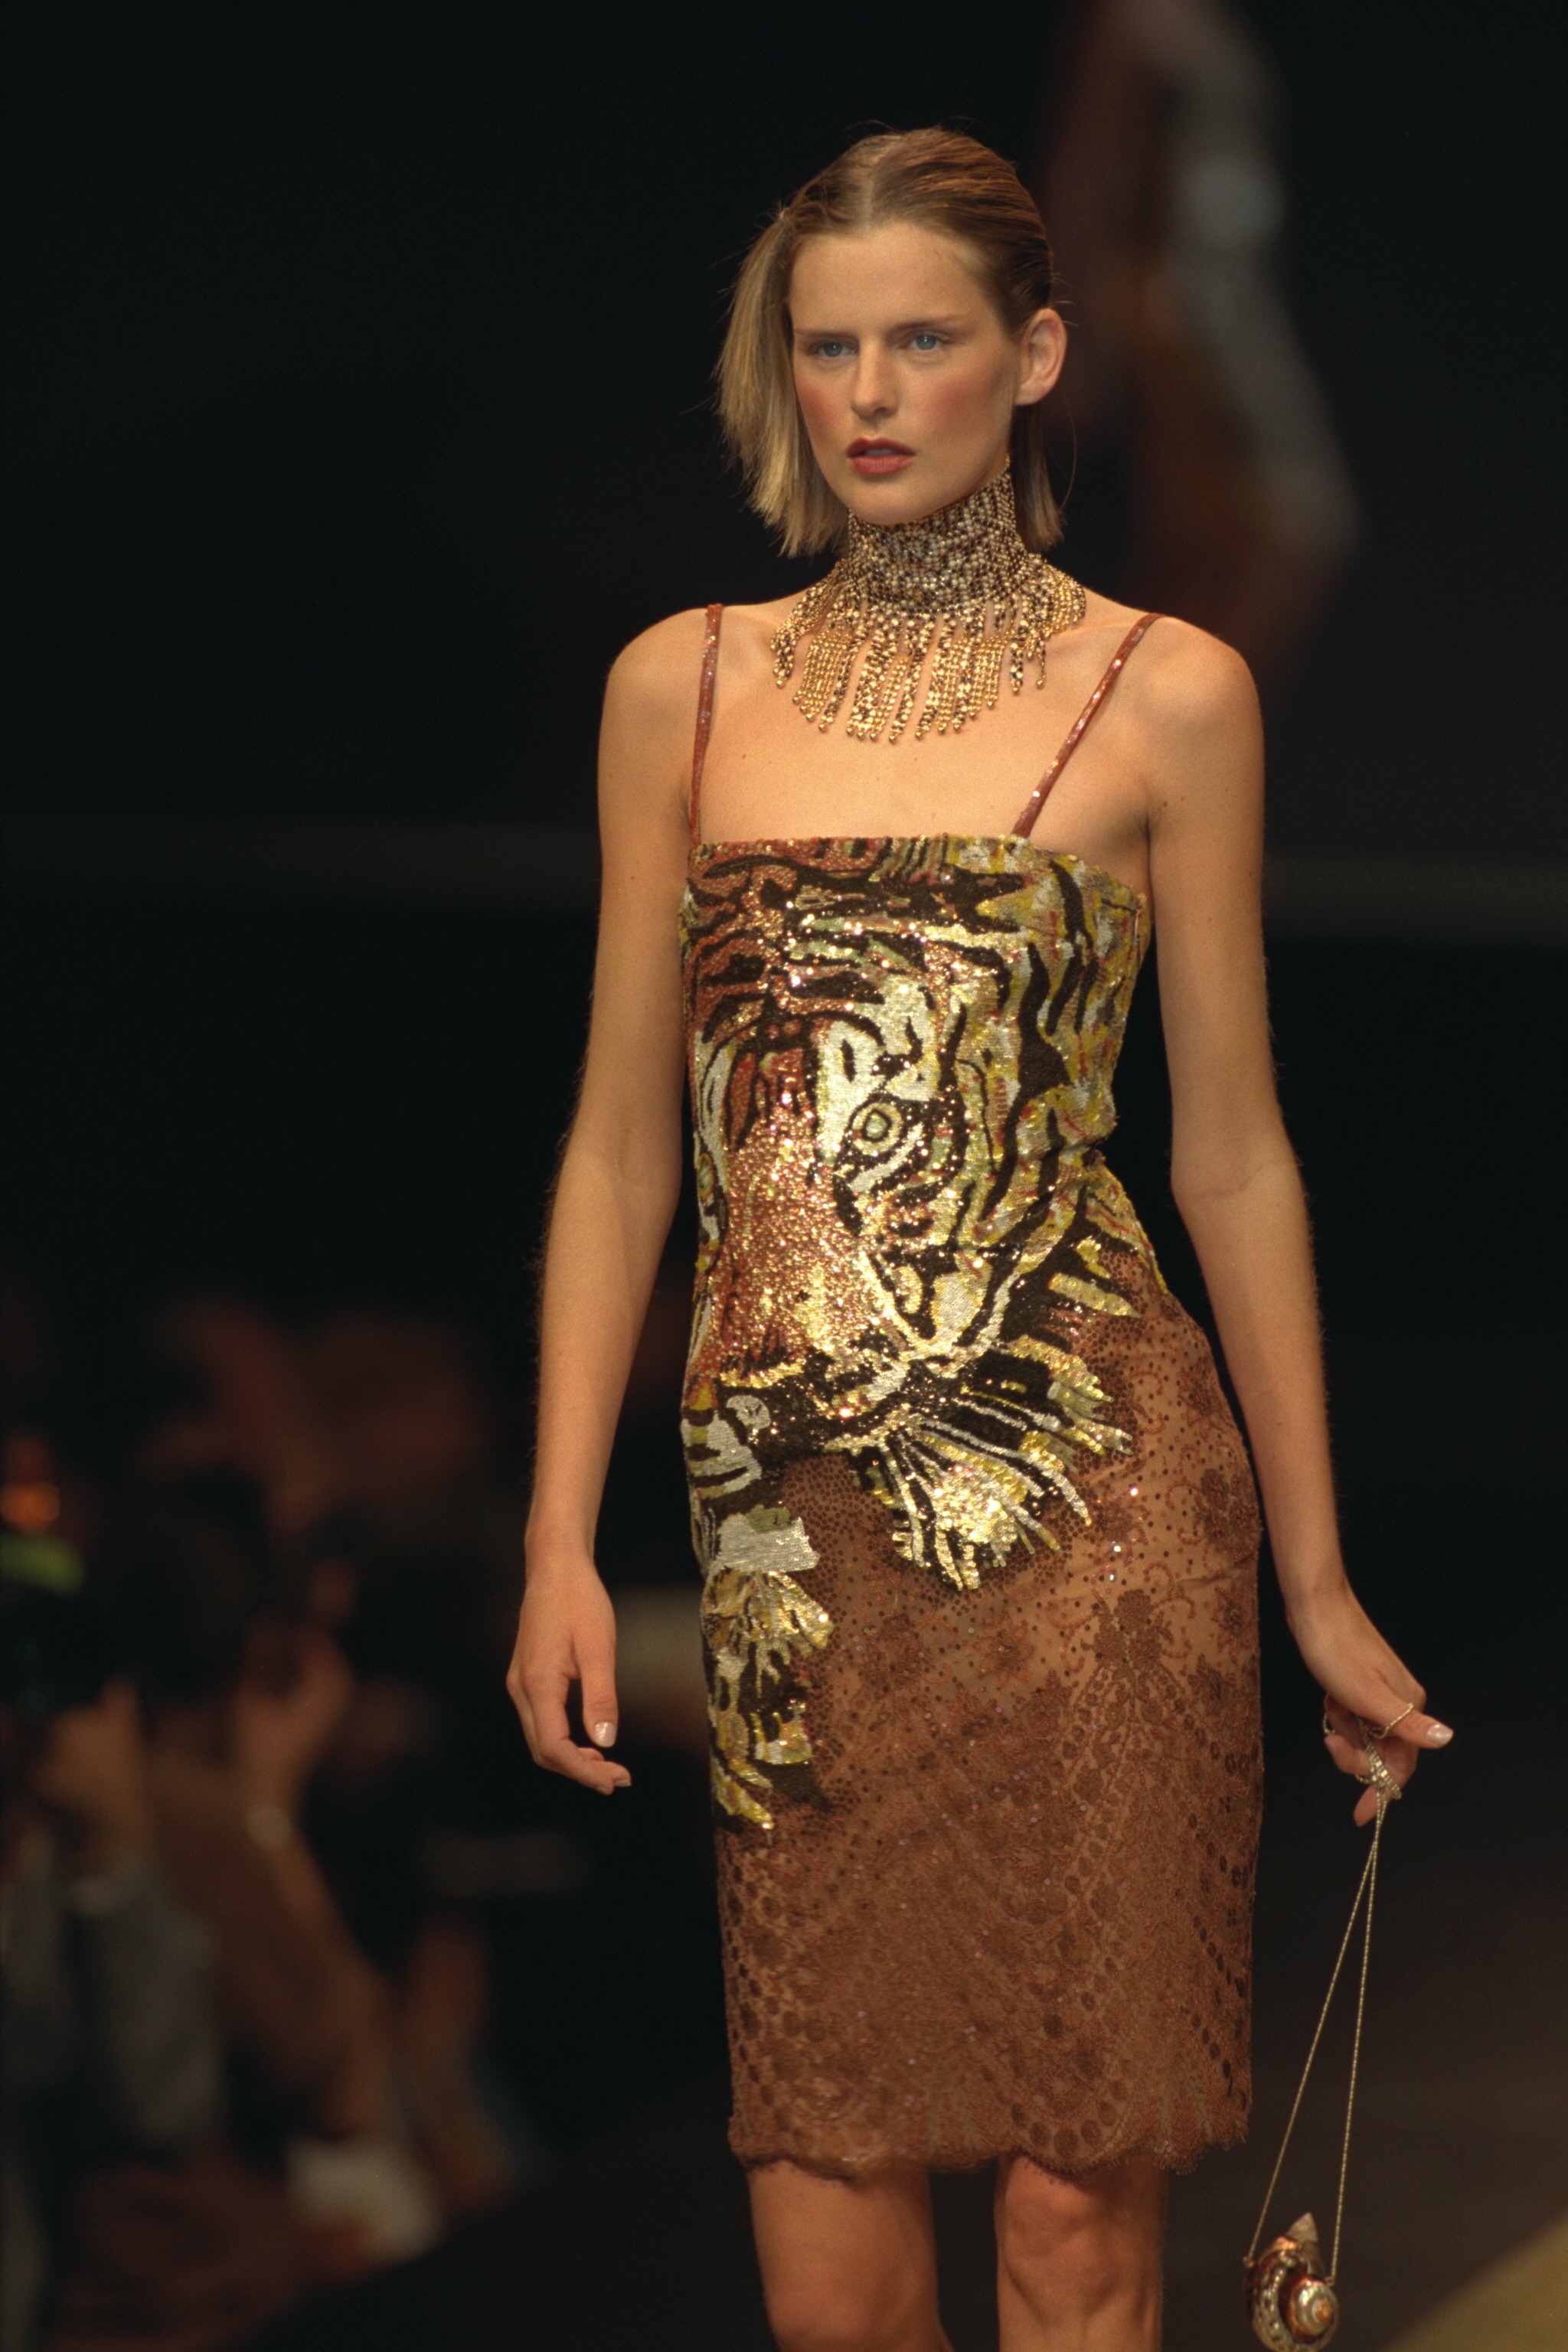 Stella Tennant walking for Valentino SS98 show in a sequin tiger dress